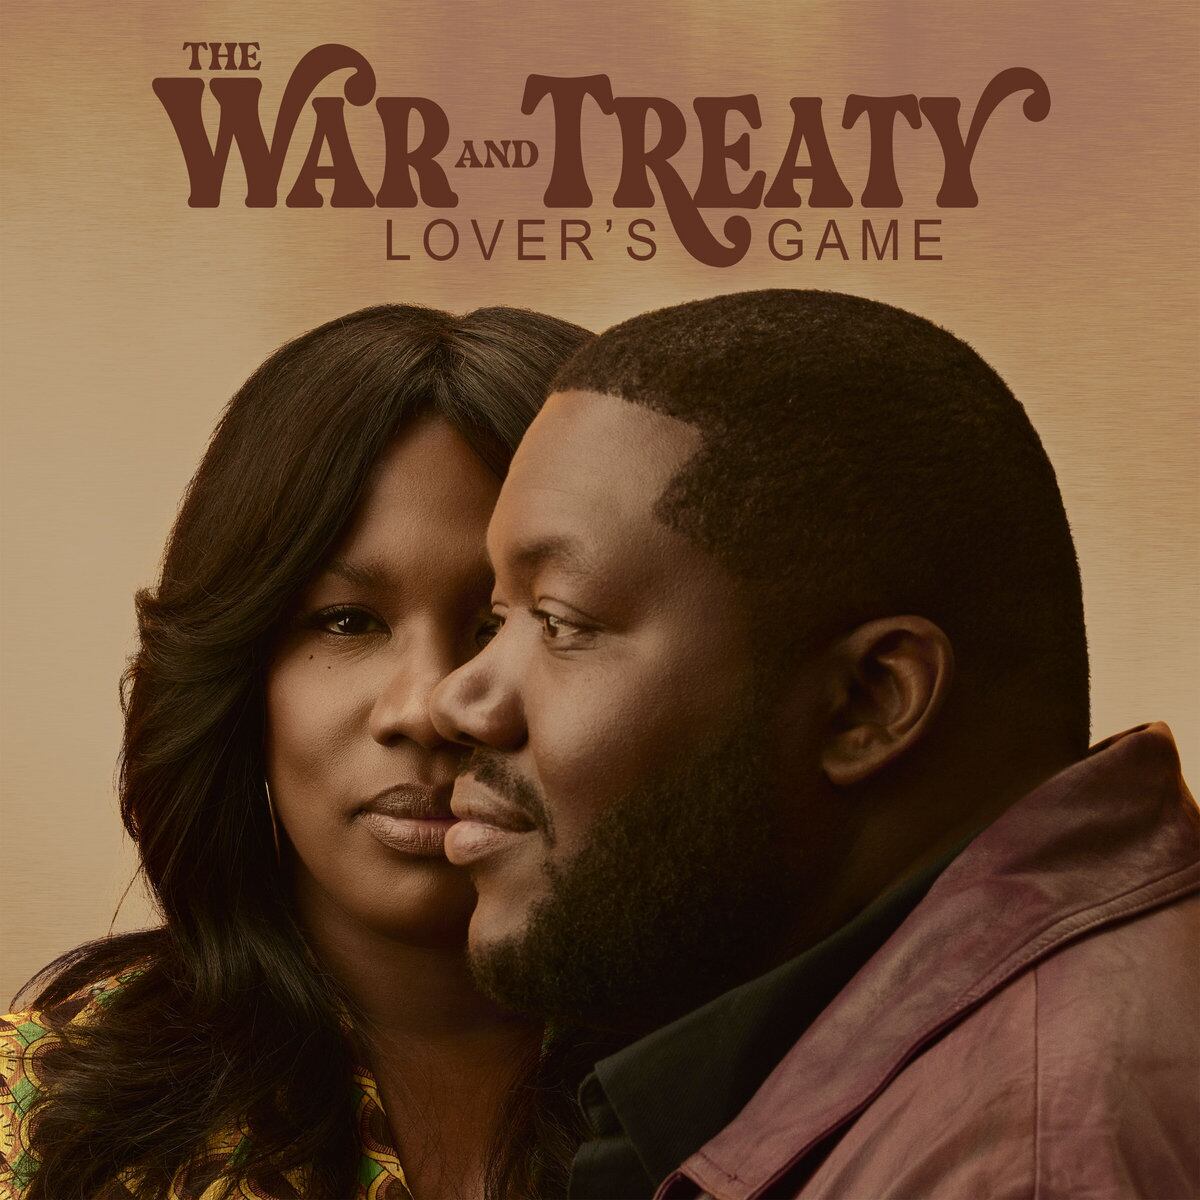 Cover of ‘Lover’s Game’, from The War and Treaty.